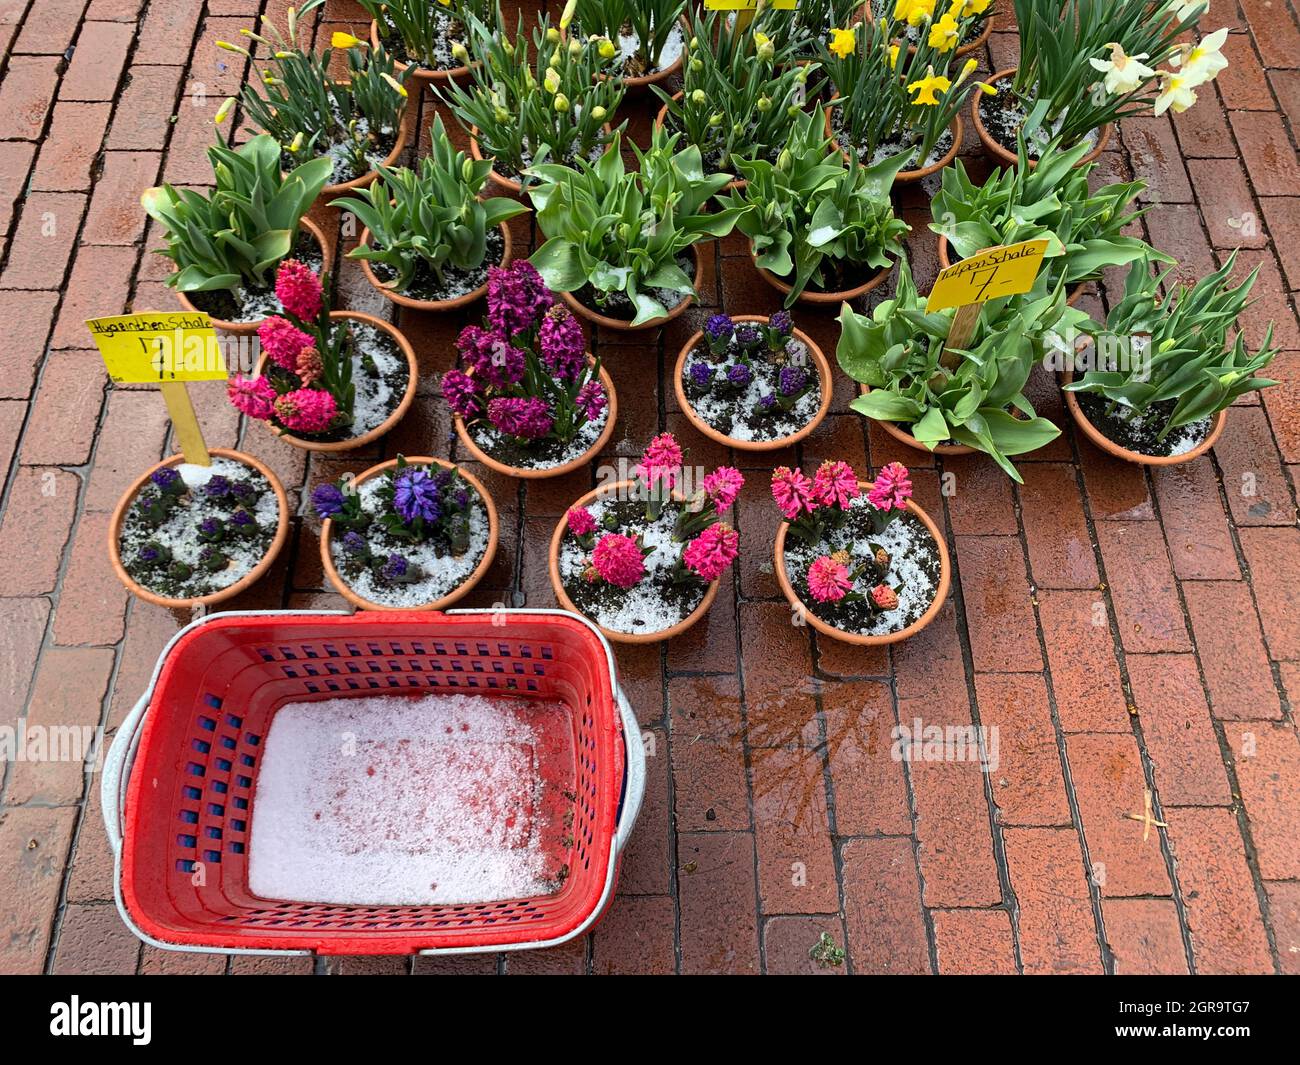 High Angle View Of Snowy Potted Plants For Sale At Florist Shop Stock Photo